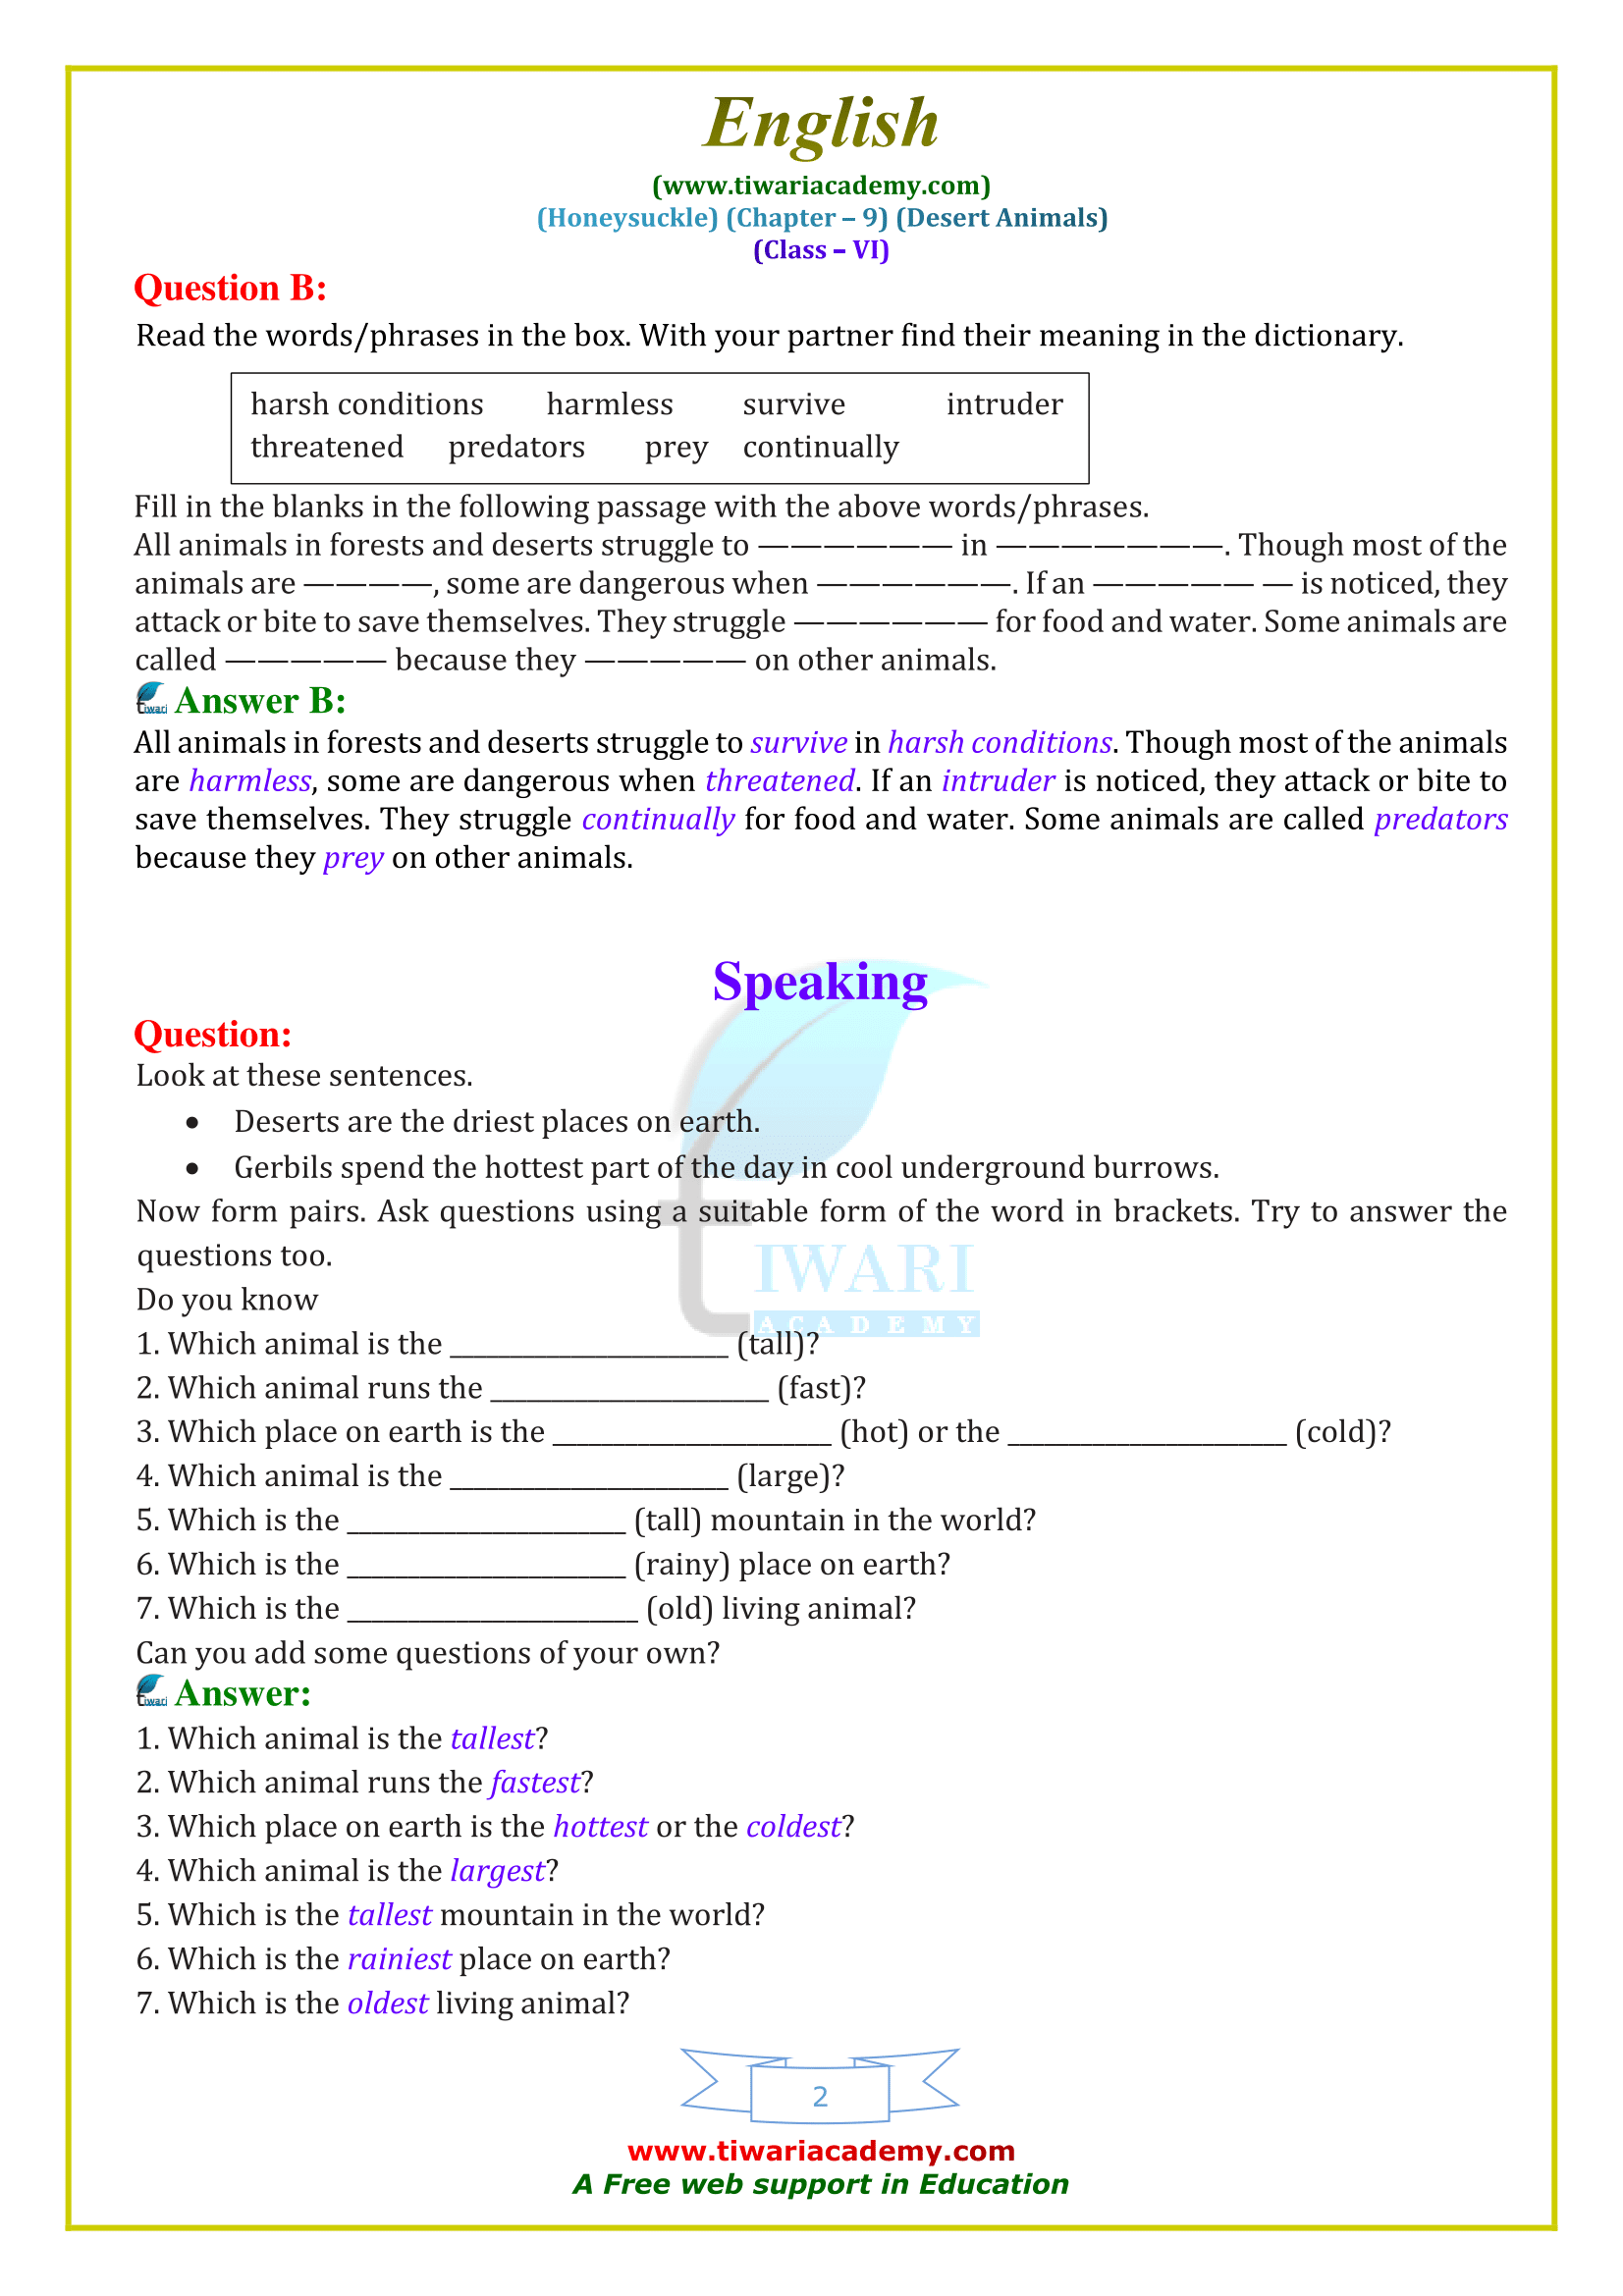 NCERT Solutions for Class 6 English Honeysuckle Chapter 9